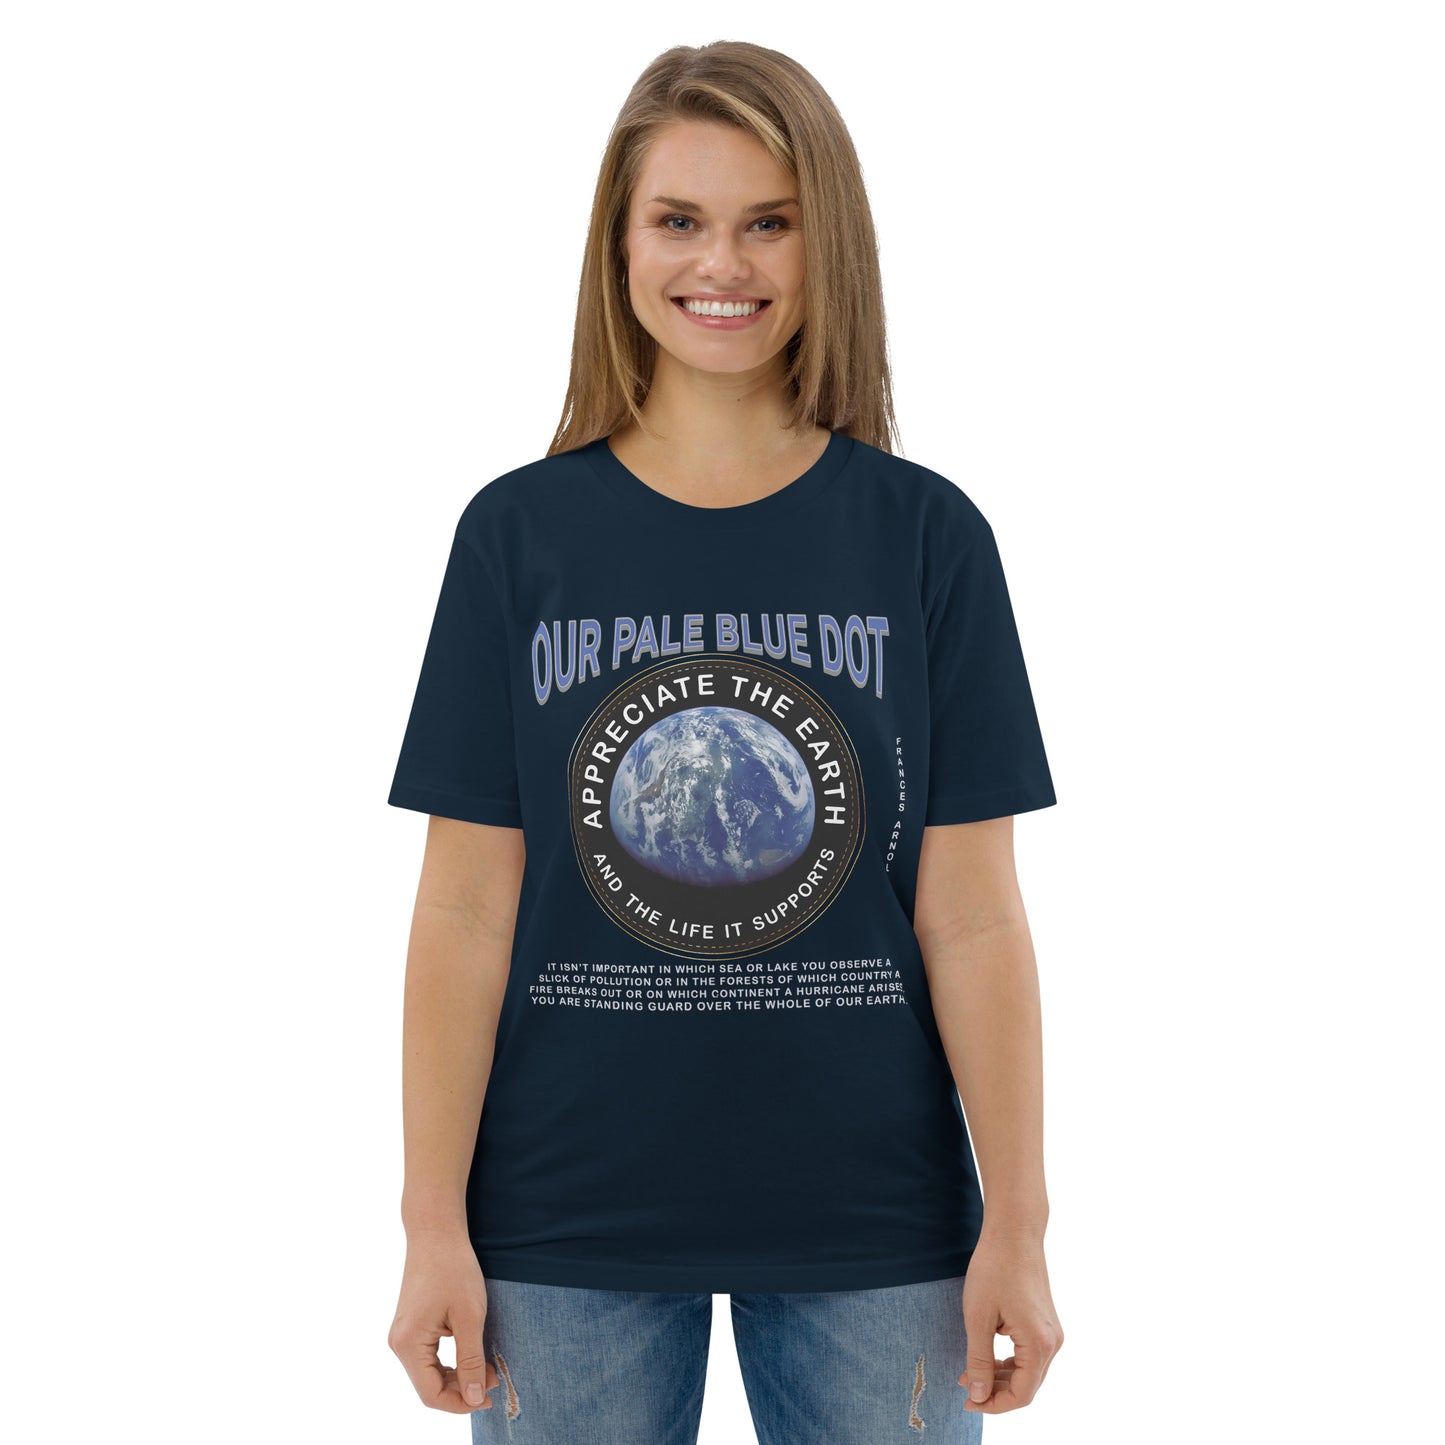 Unisex organic cotton t-shirt - Appreciate The Earth (Frances Arnold) & The Life It Supports